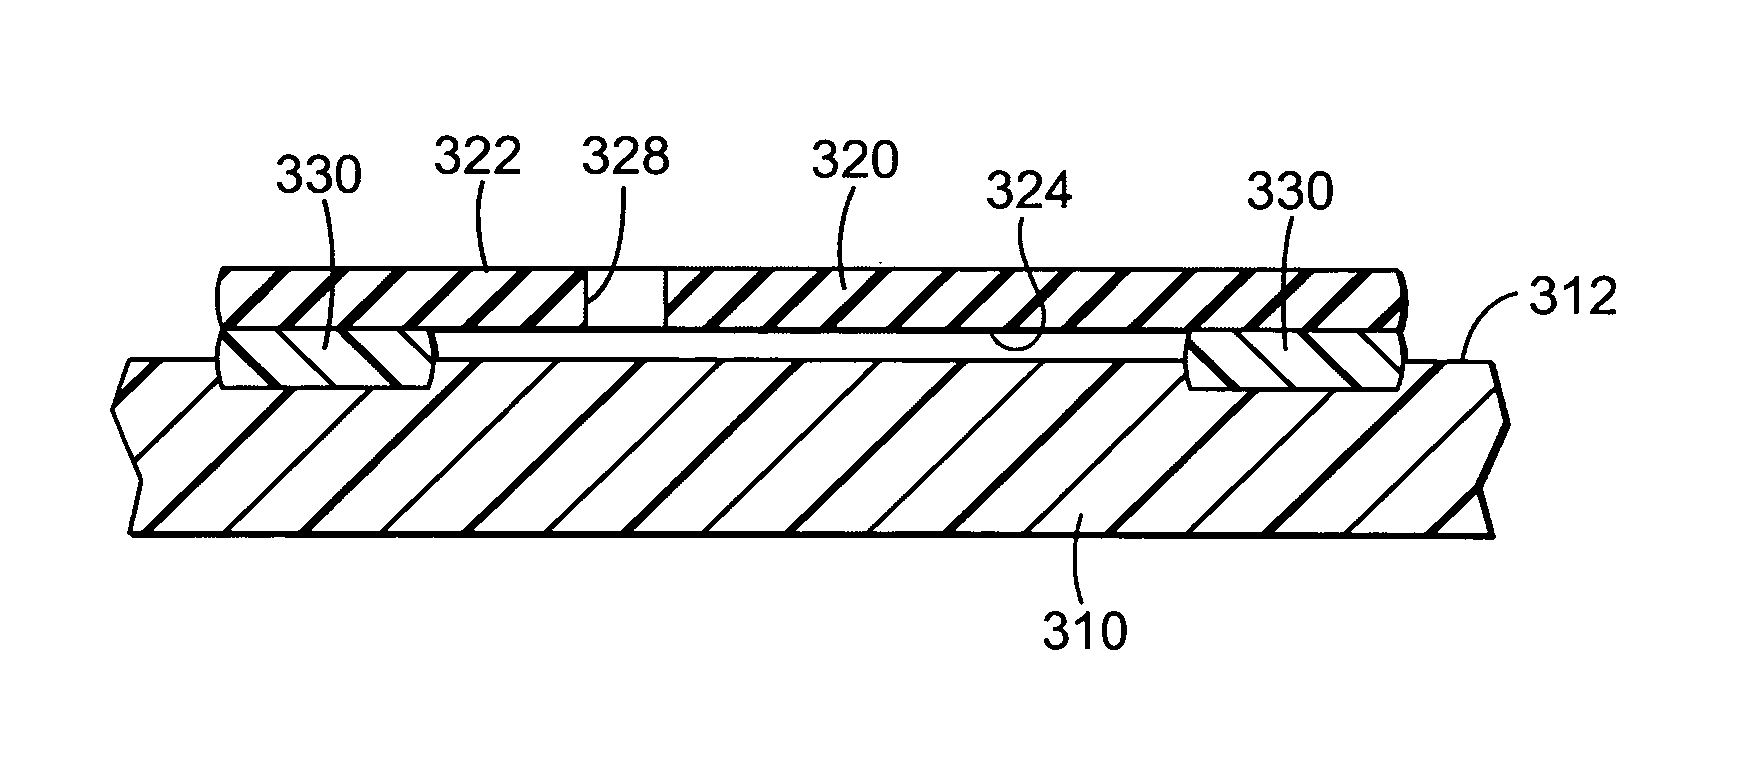 Composite webs with elastic composite structures